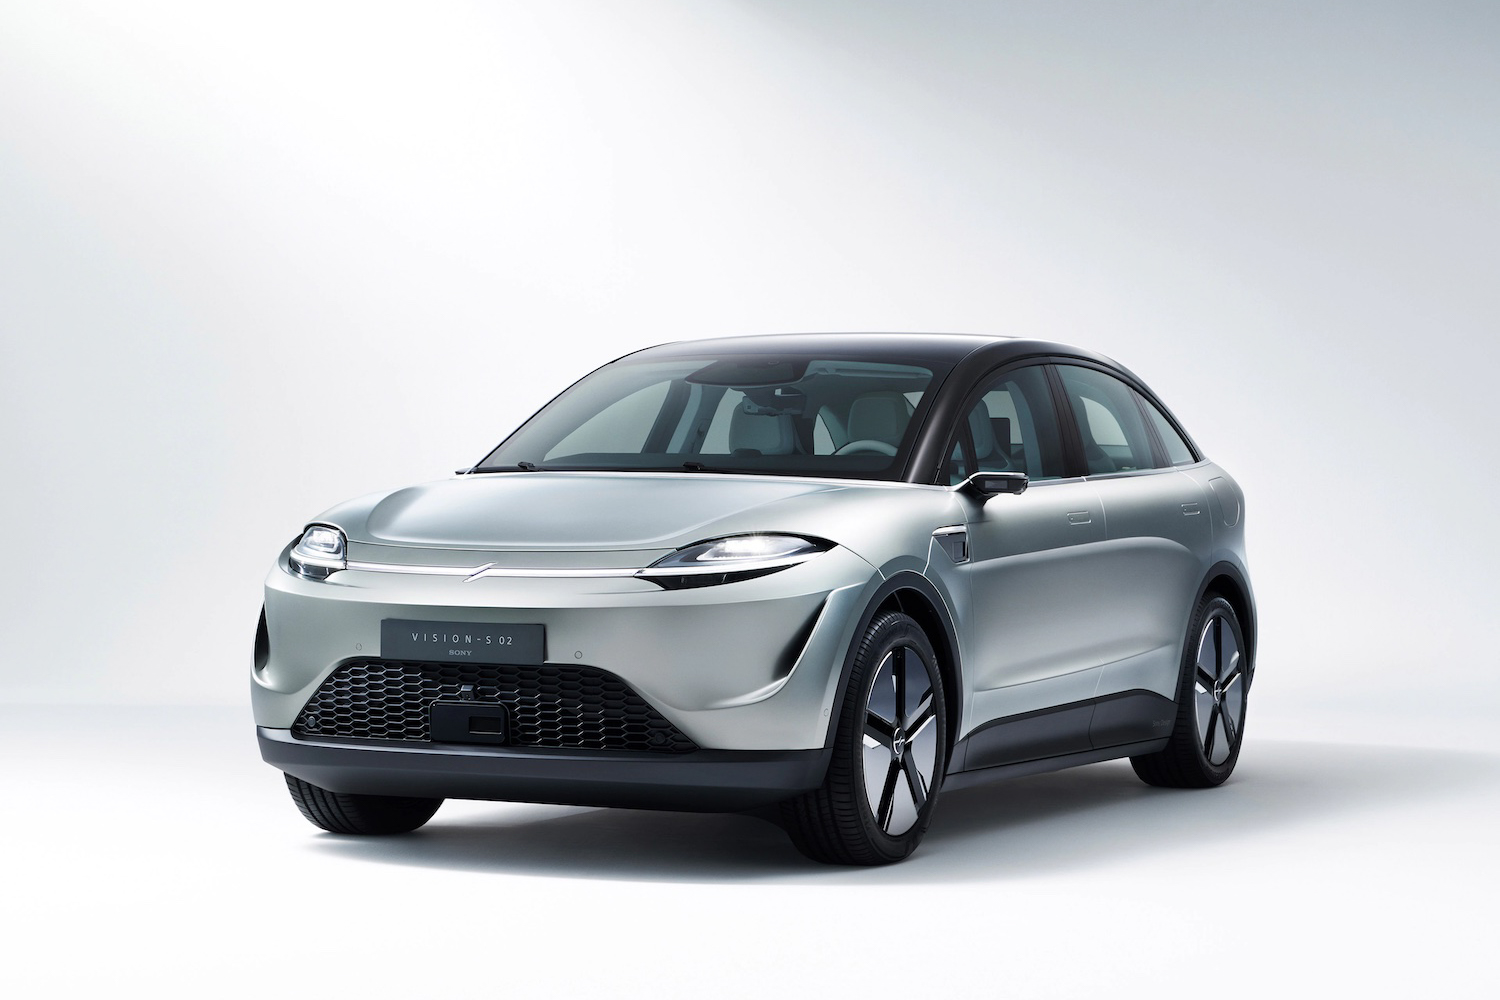 Car News | Sony shows off new electric SUV | CompleteCar.ie